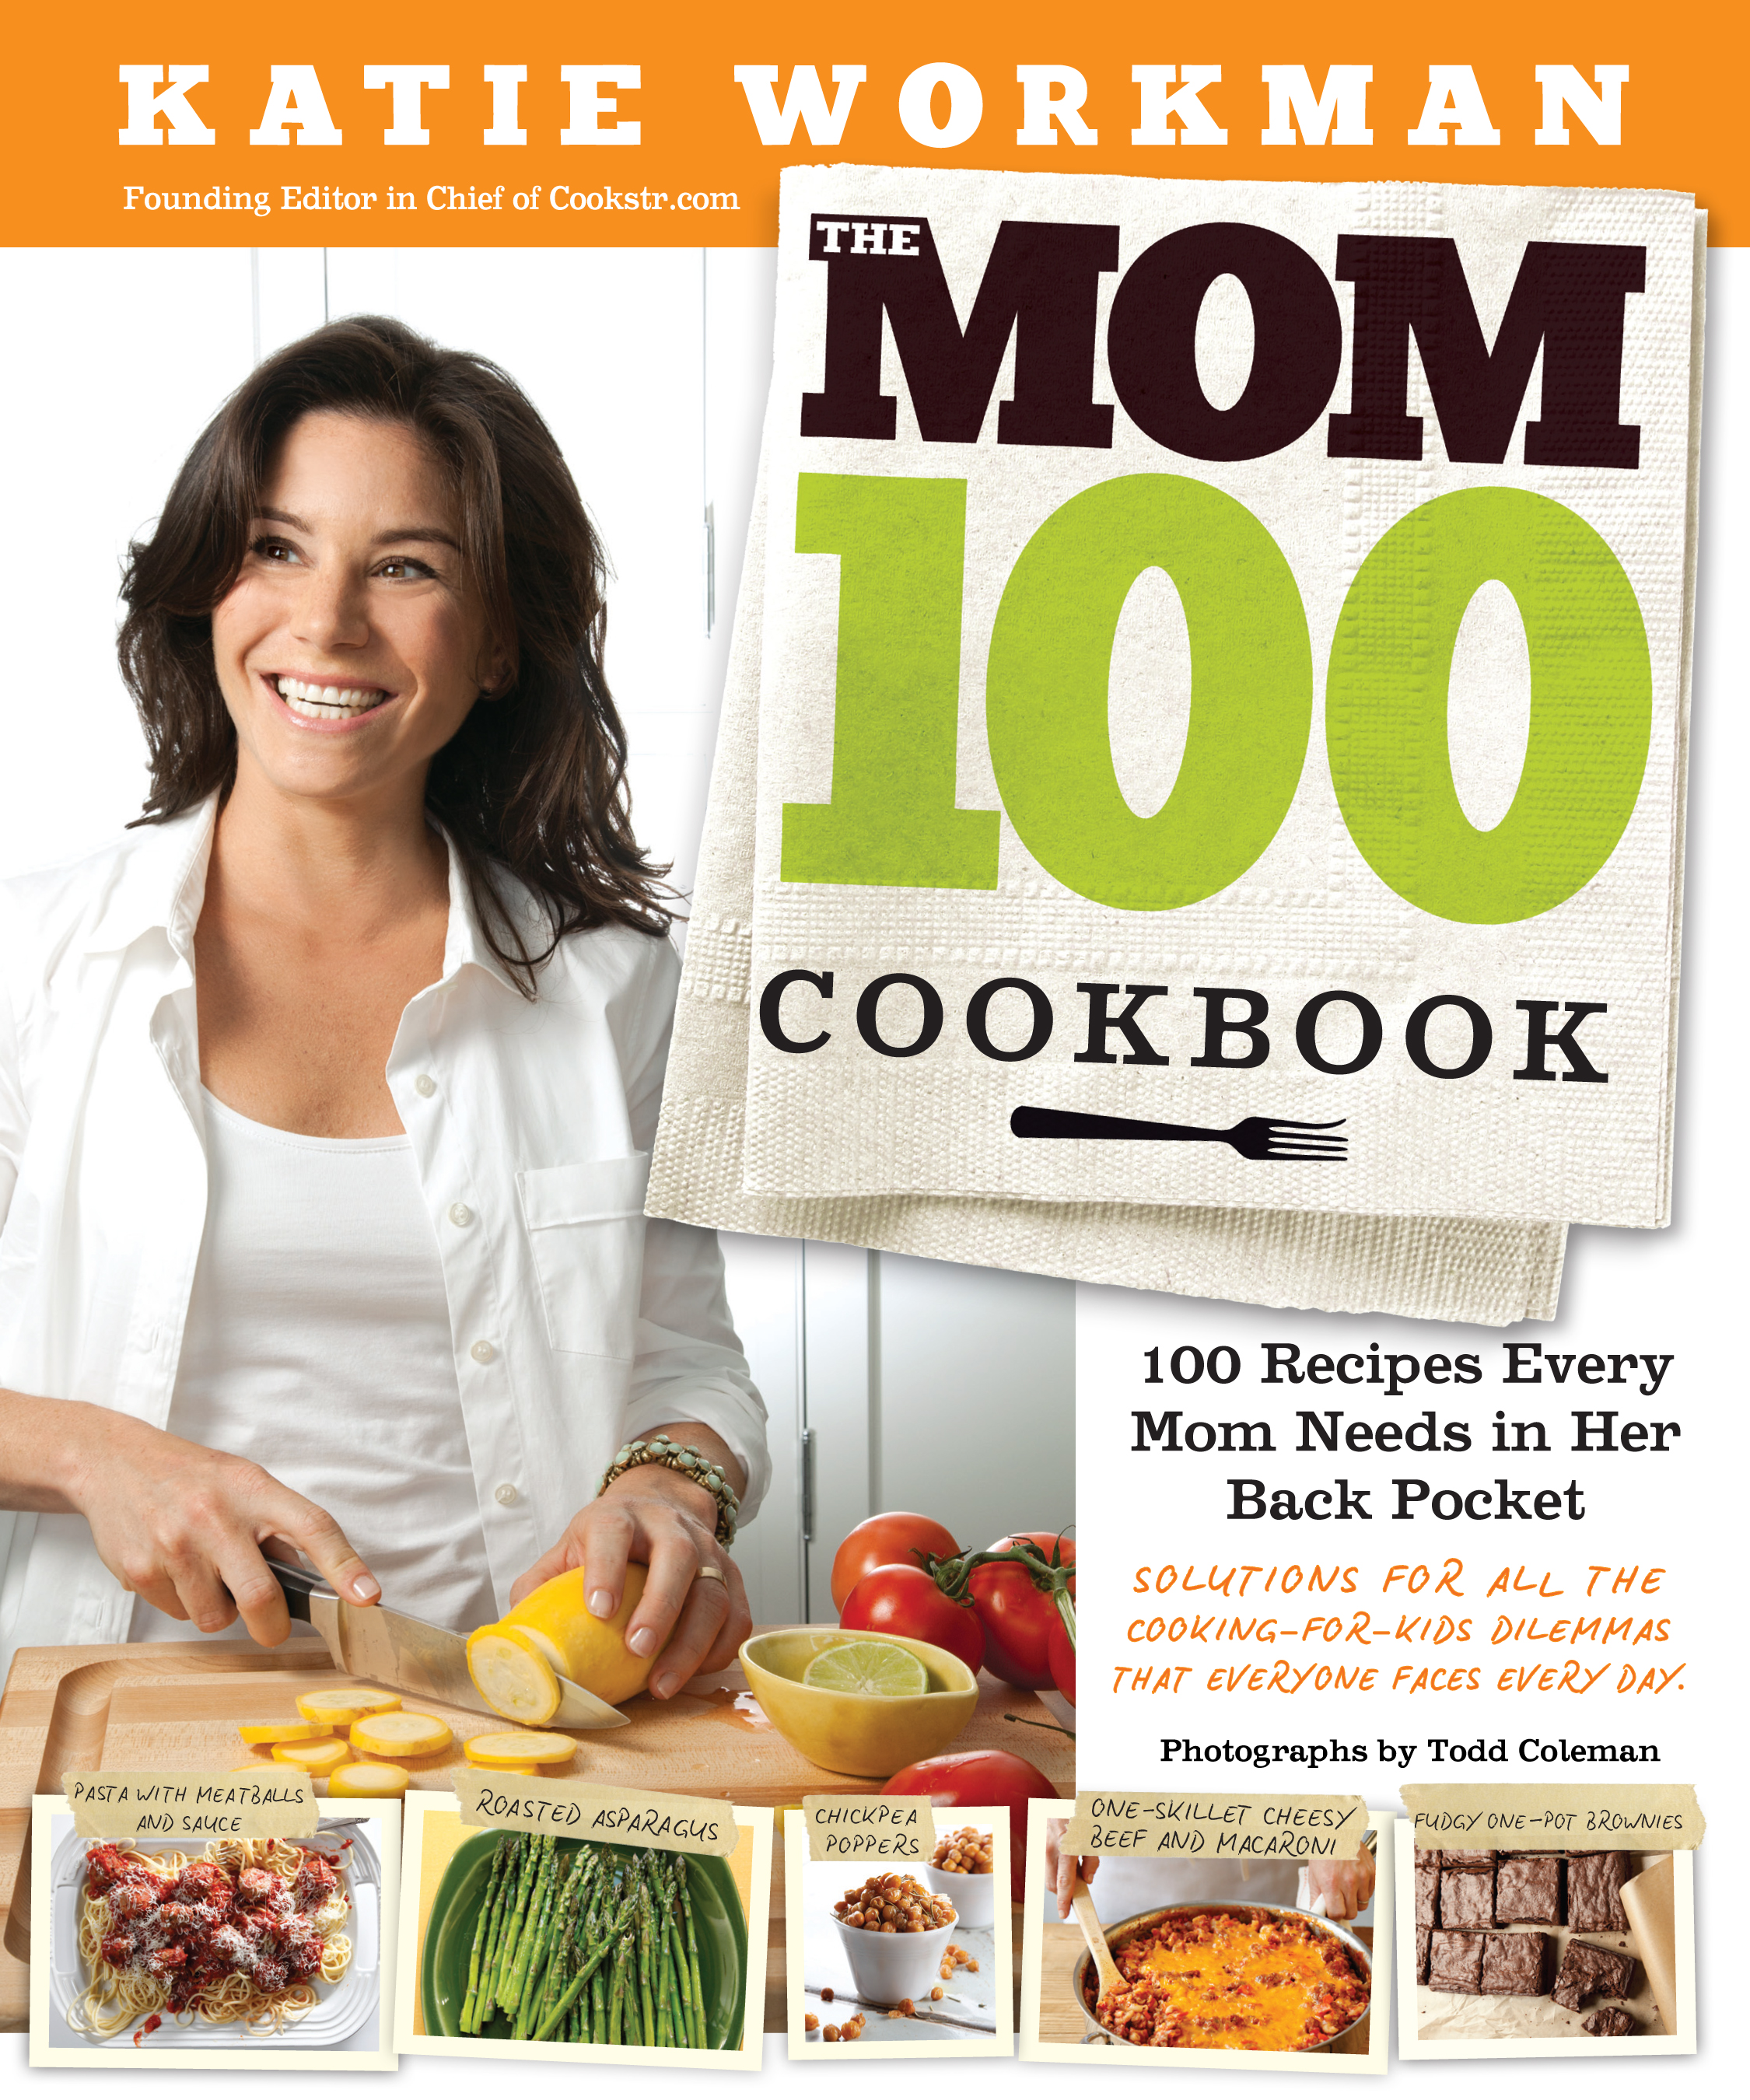 The mom 100 cookbook 100 recipes every mom needs in her back pocket cover image